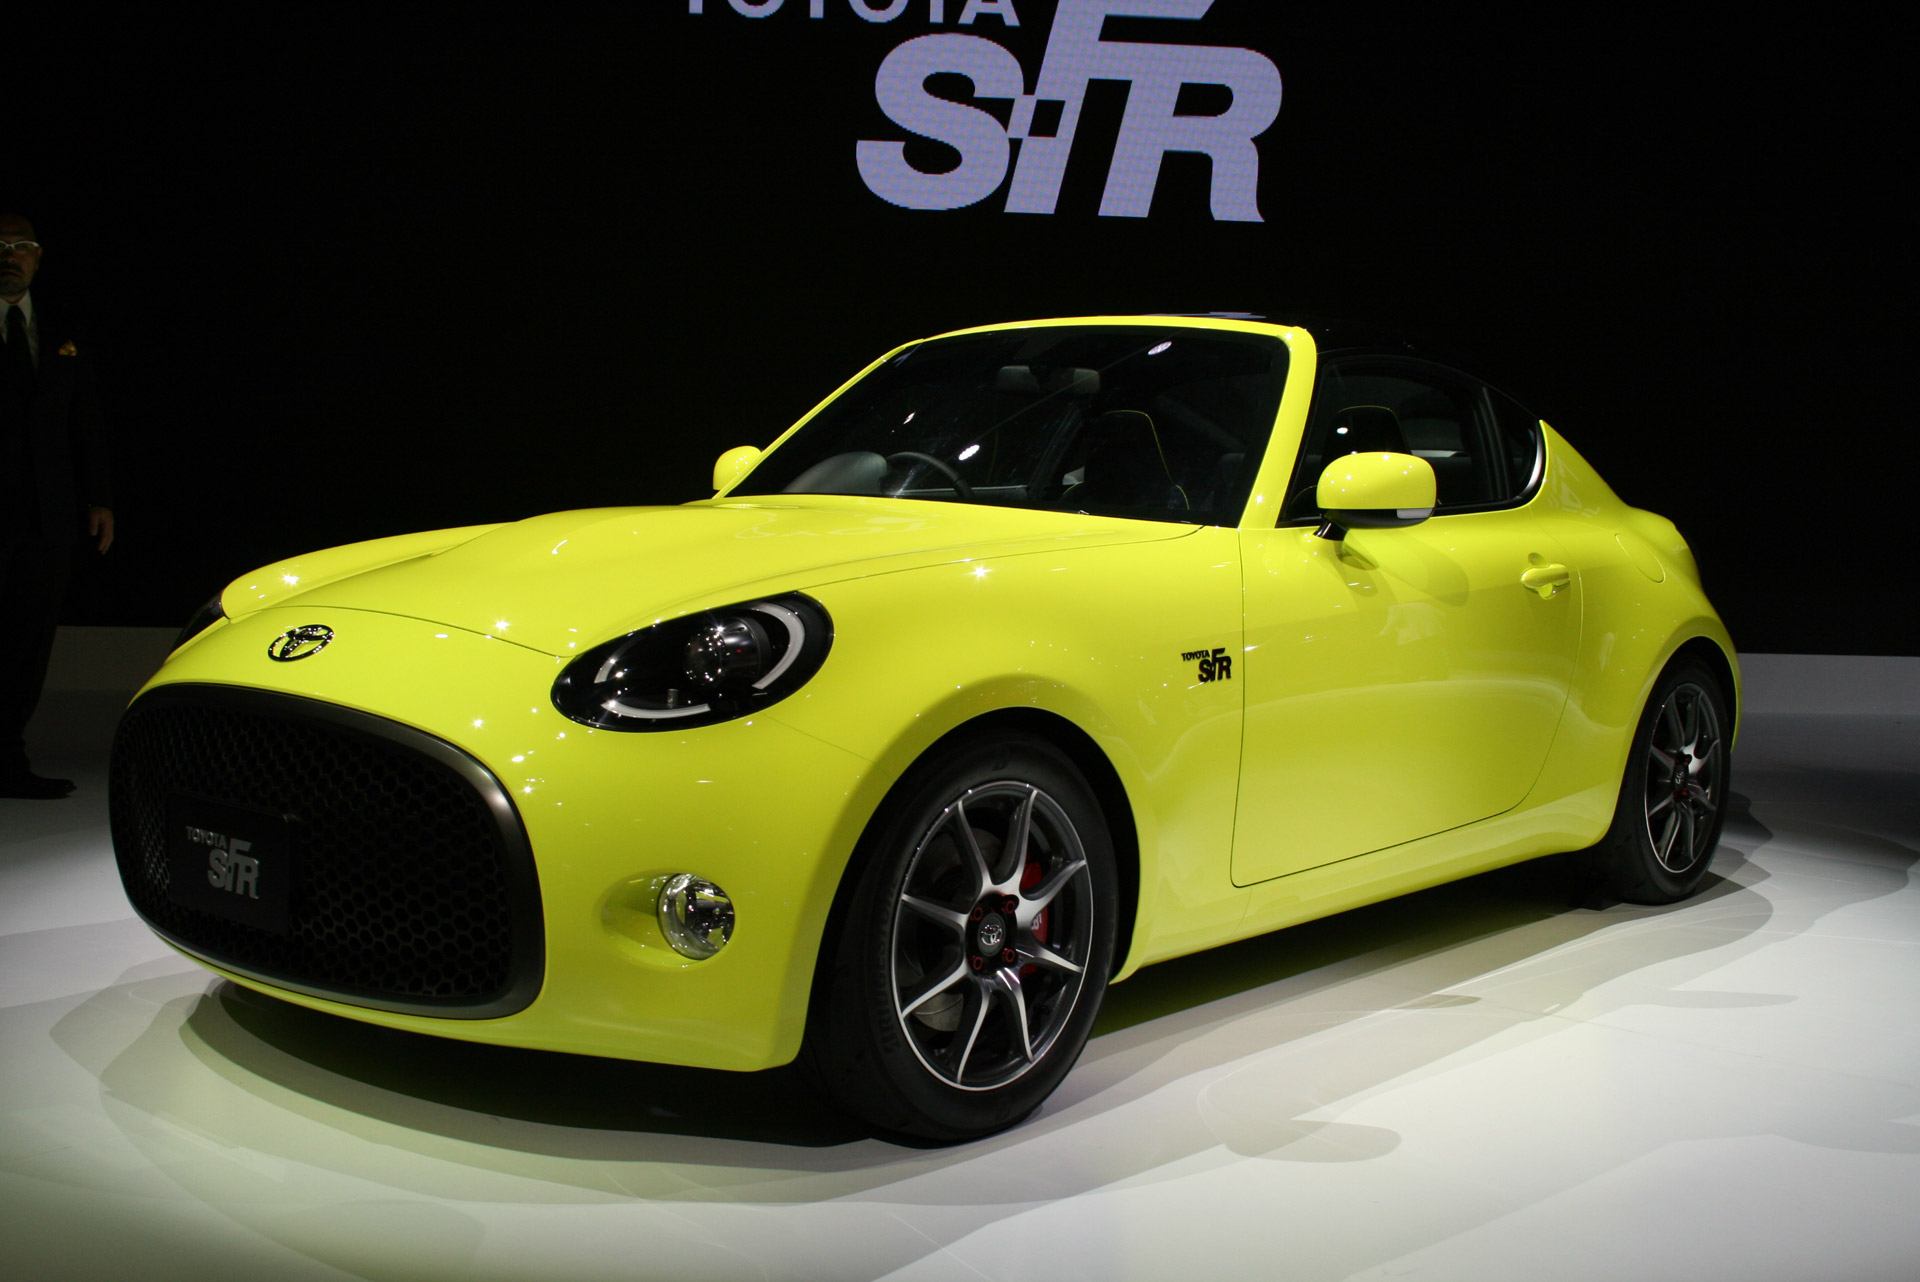 Toyota previews new entry-level sports car with S-FR concept